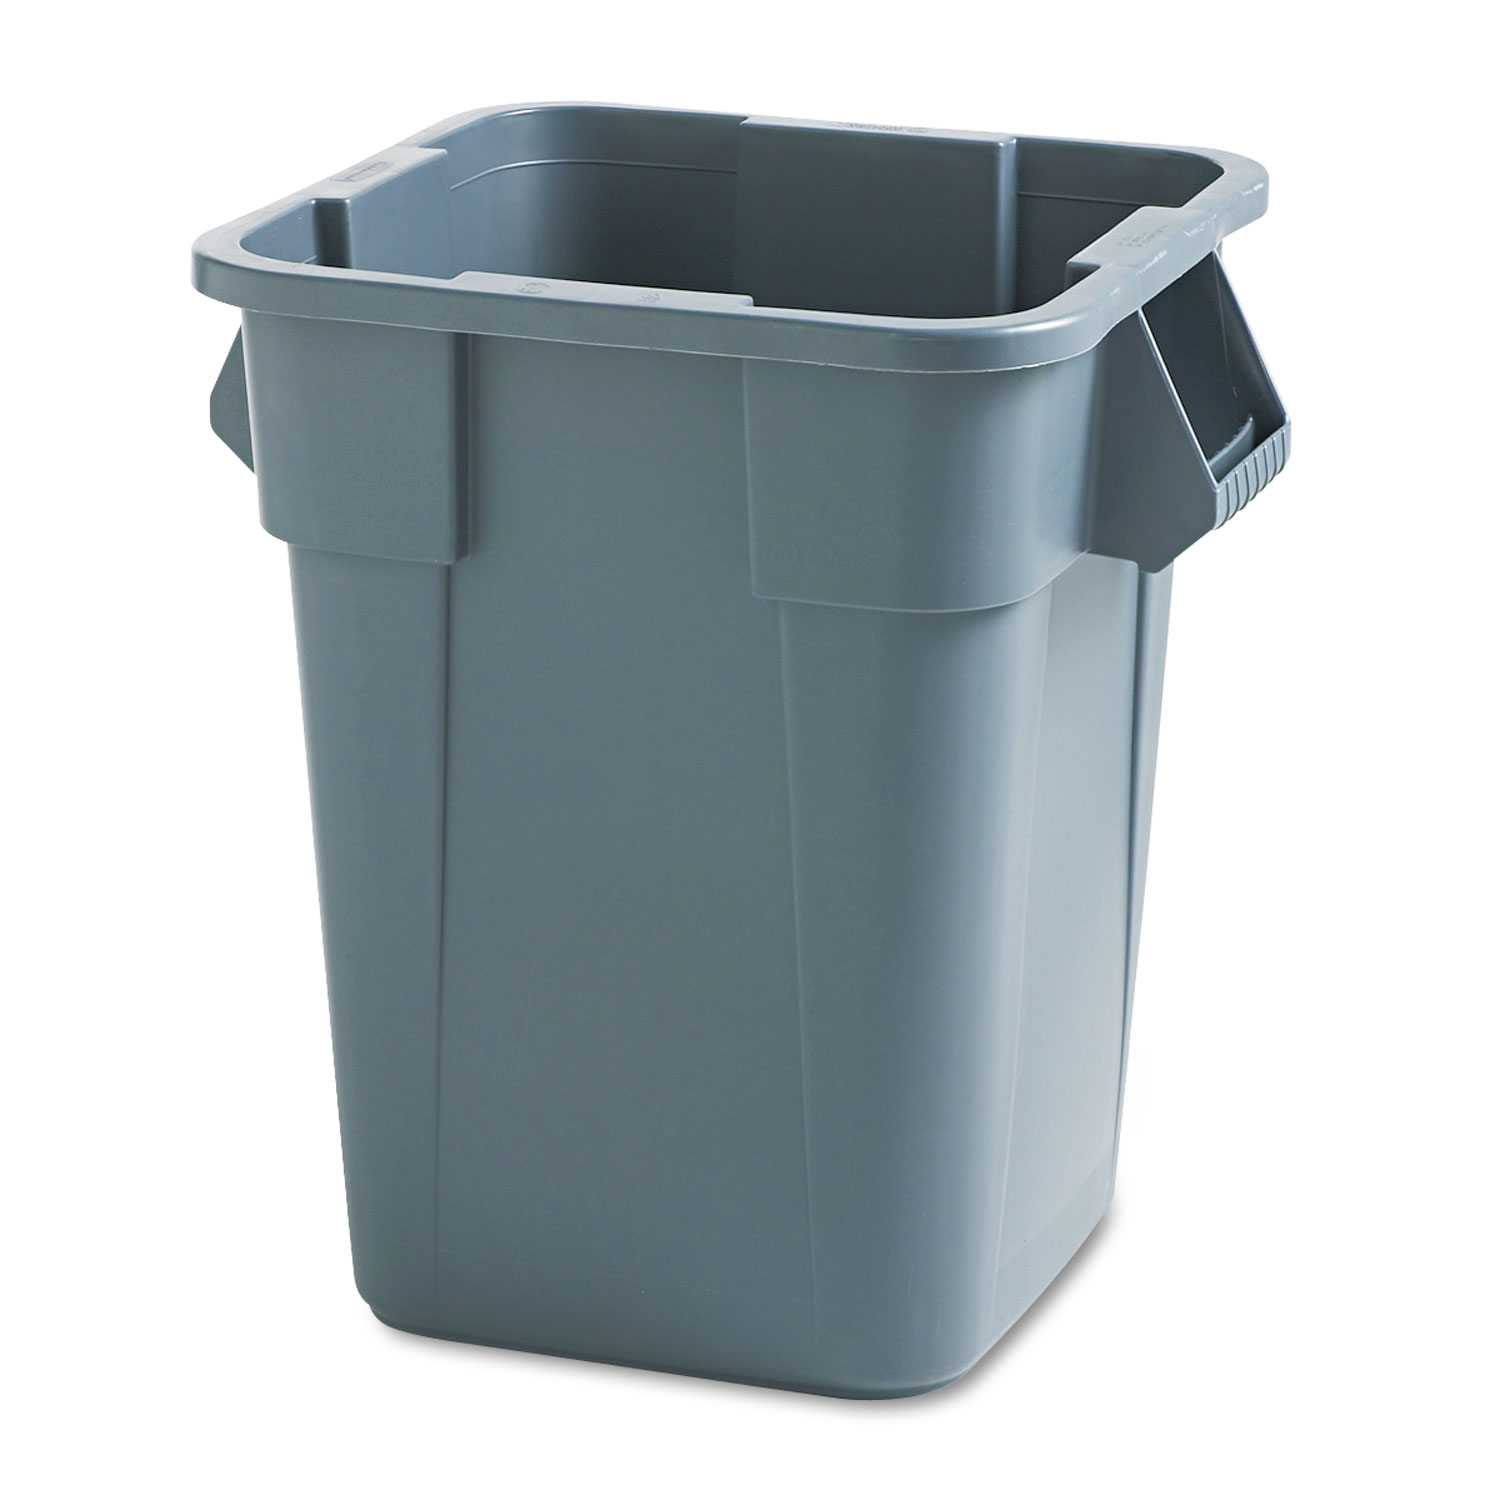  Rubbermaid Commercial FG353600GRAY Brute Container, Square, Polyethylene, 40 gal, Gray (RCP353600GY) 